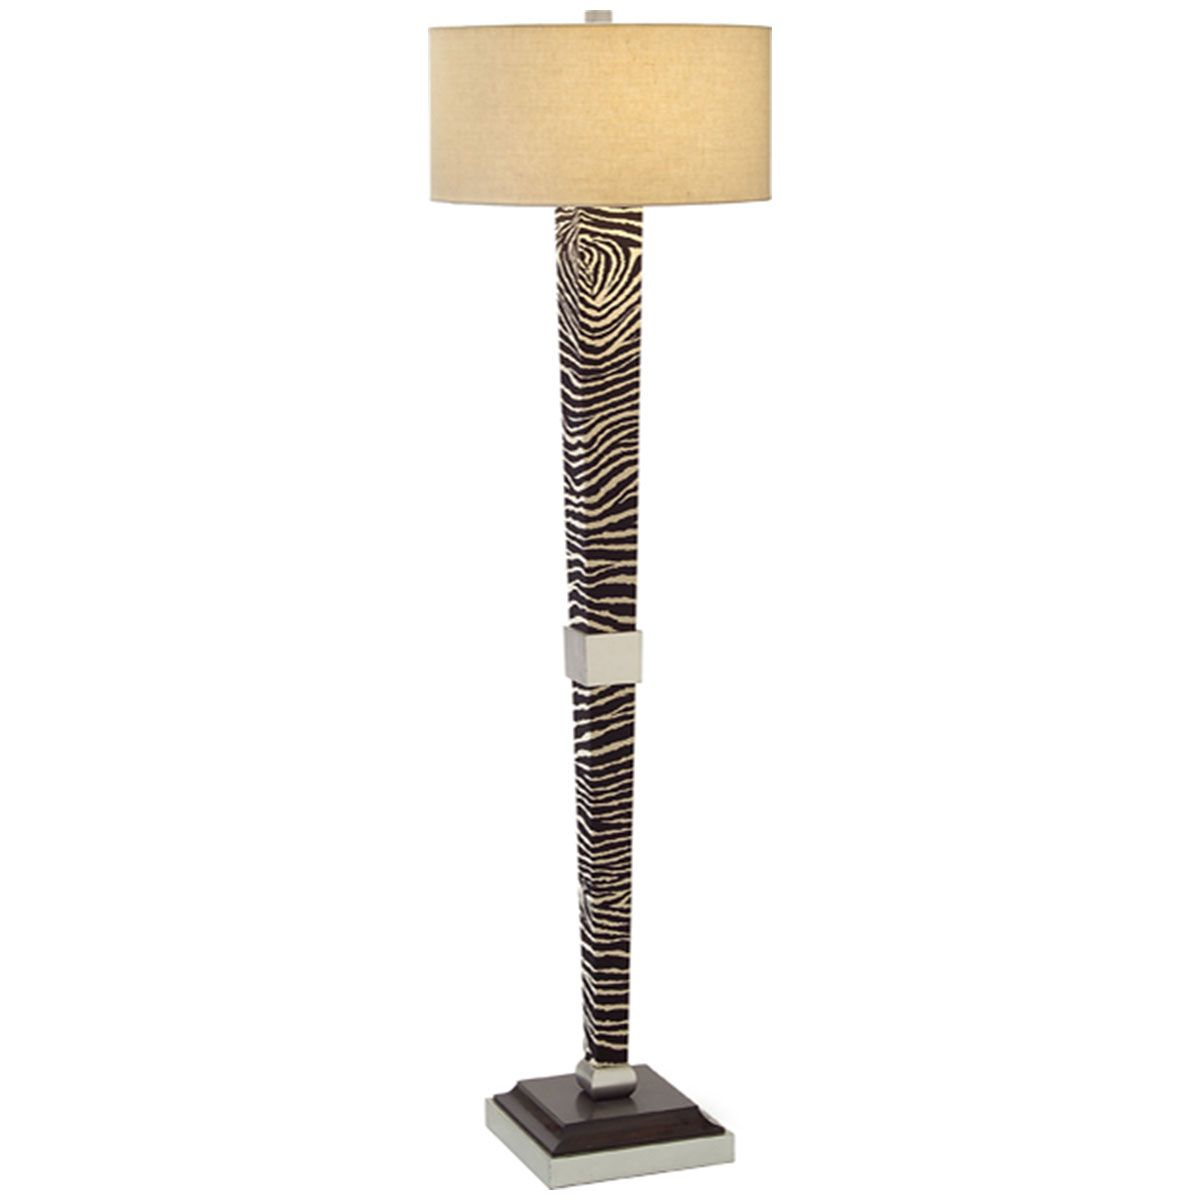 Jrl 8855 Floor Lamp Contemporary Floor Lamps Modern within sizing 1200 X 1200